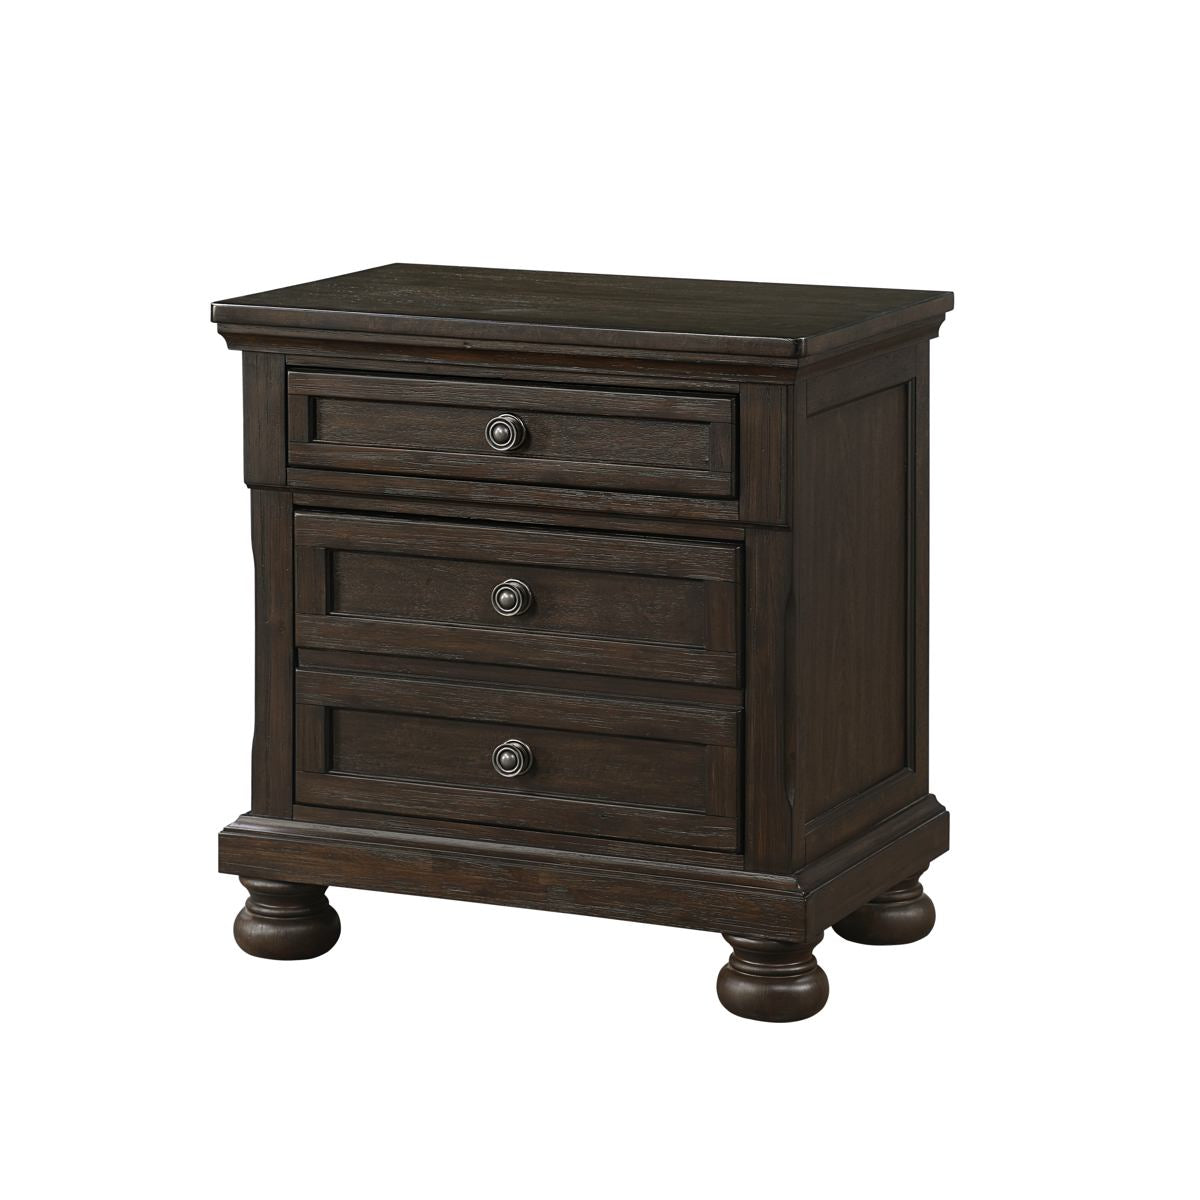 Lauren Brushed Brown Acacia USB Nightstand by Avalon Furniture